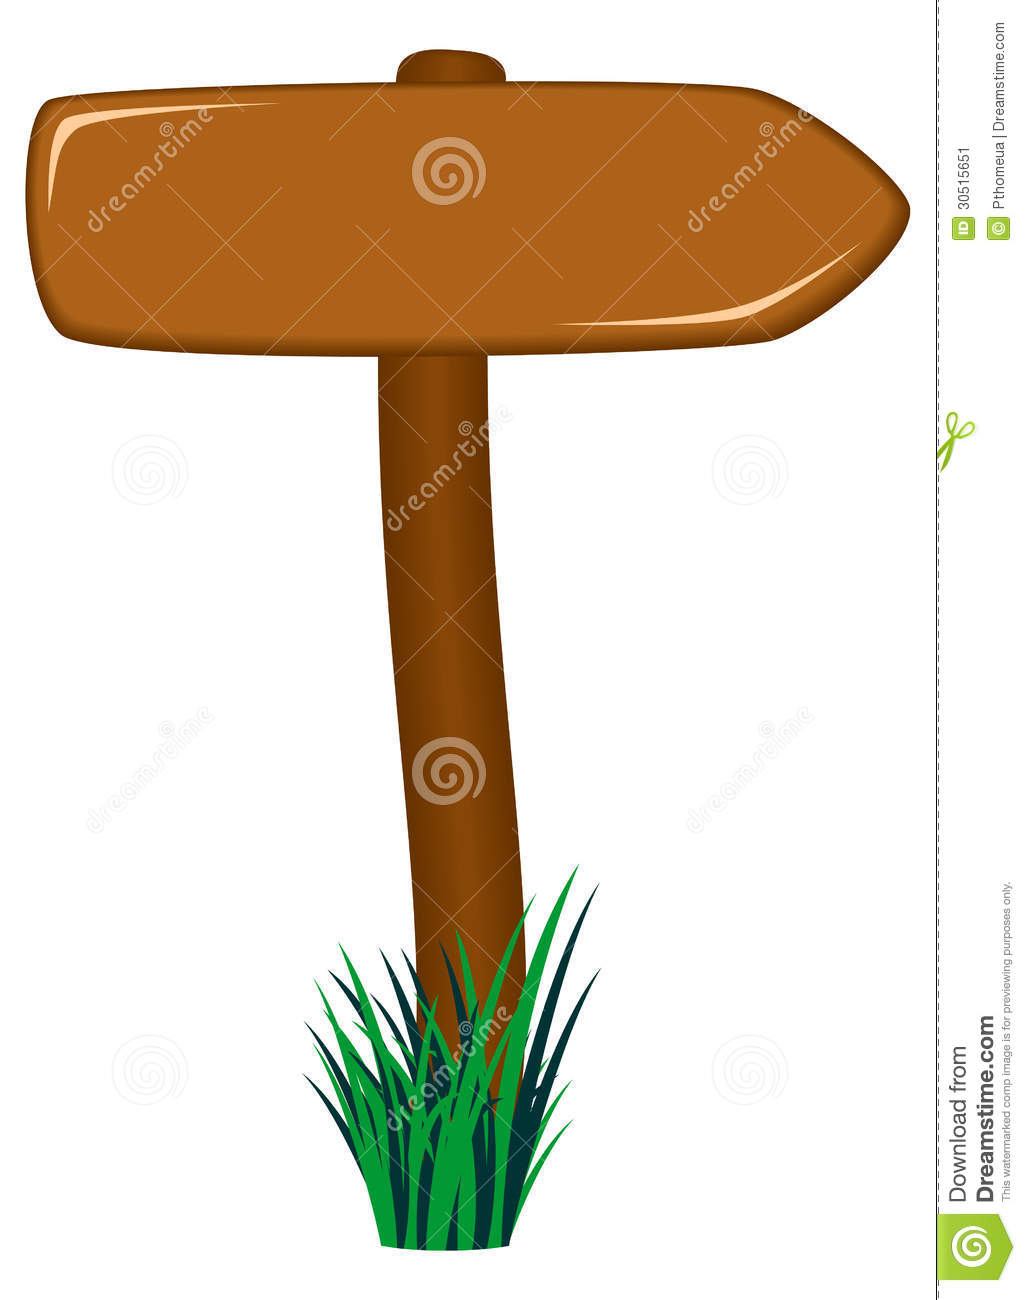 Stock Image  Wooden Road Sign As Arrow In Grass